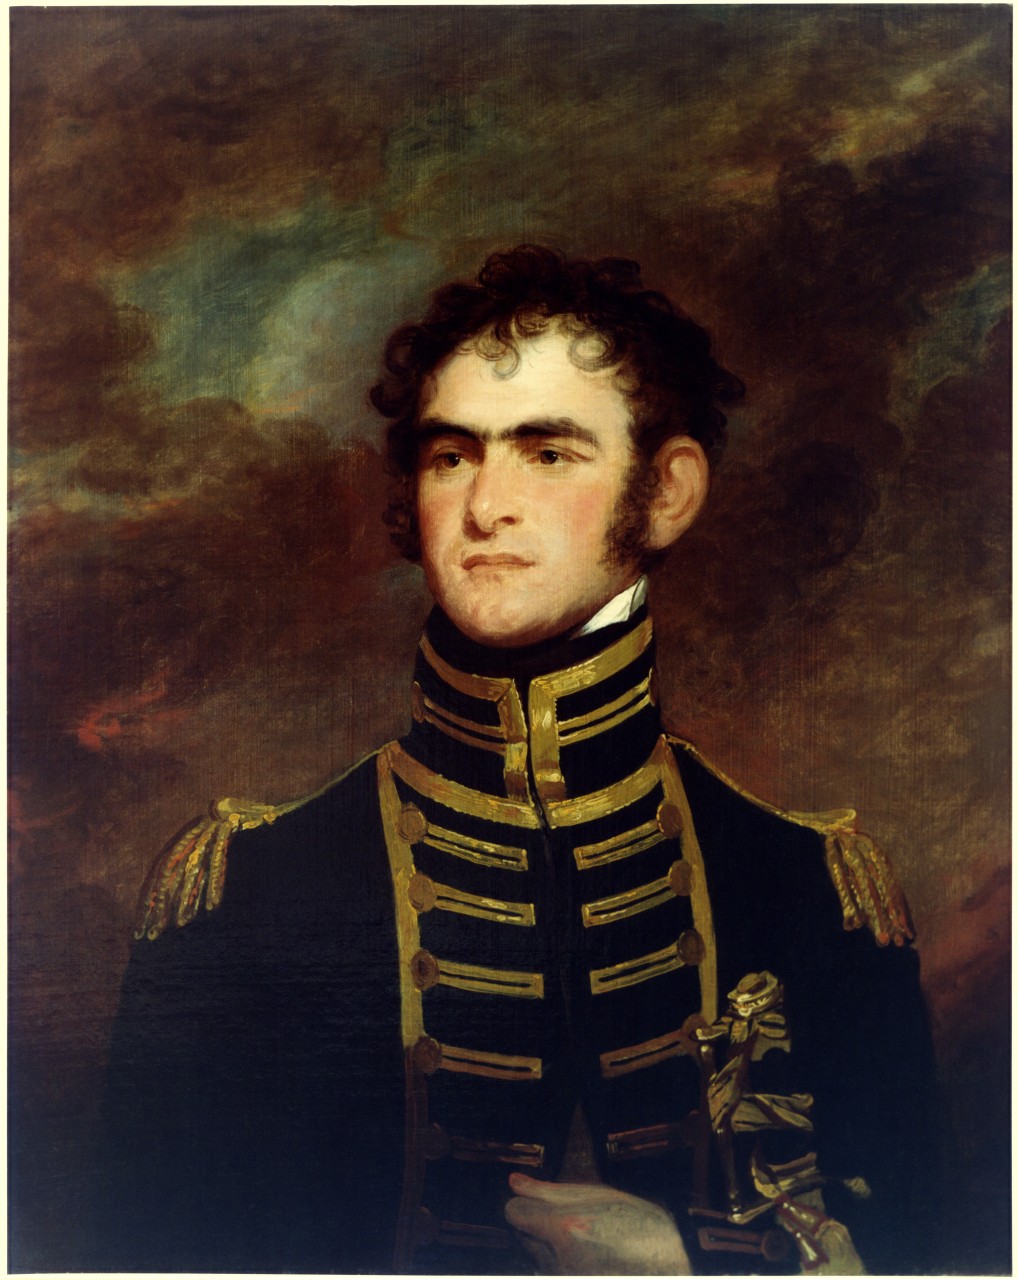 John Rodgers, probably painted between 1803 and 1806. US Navy Art Collection.